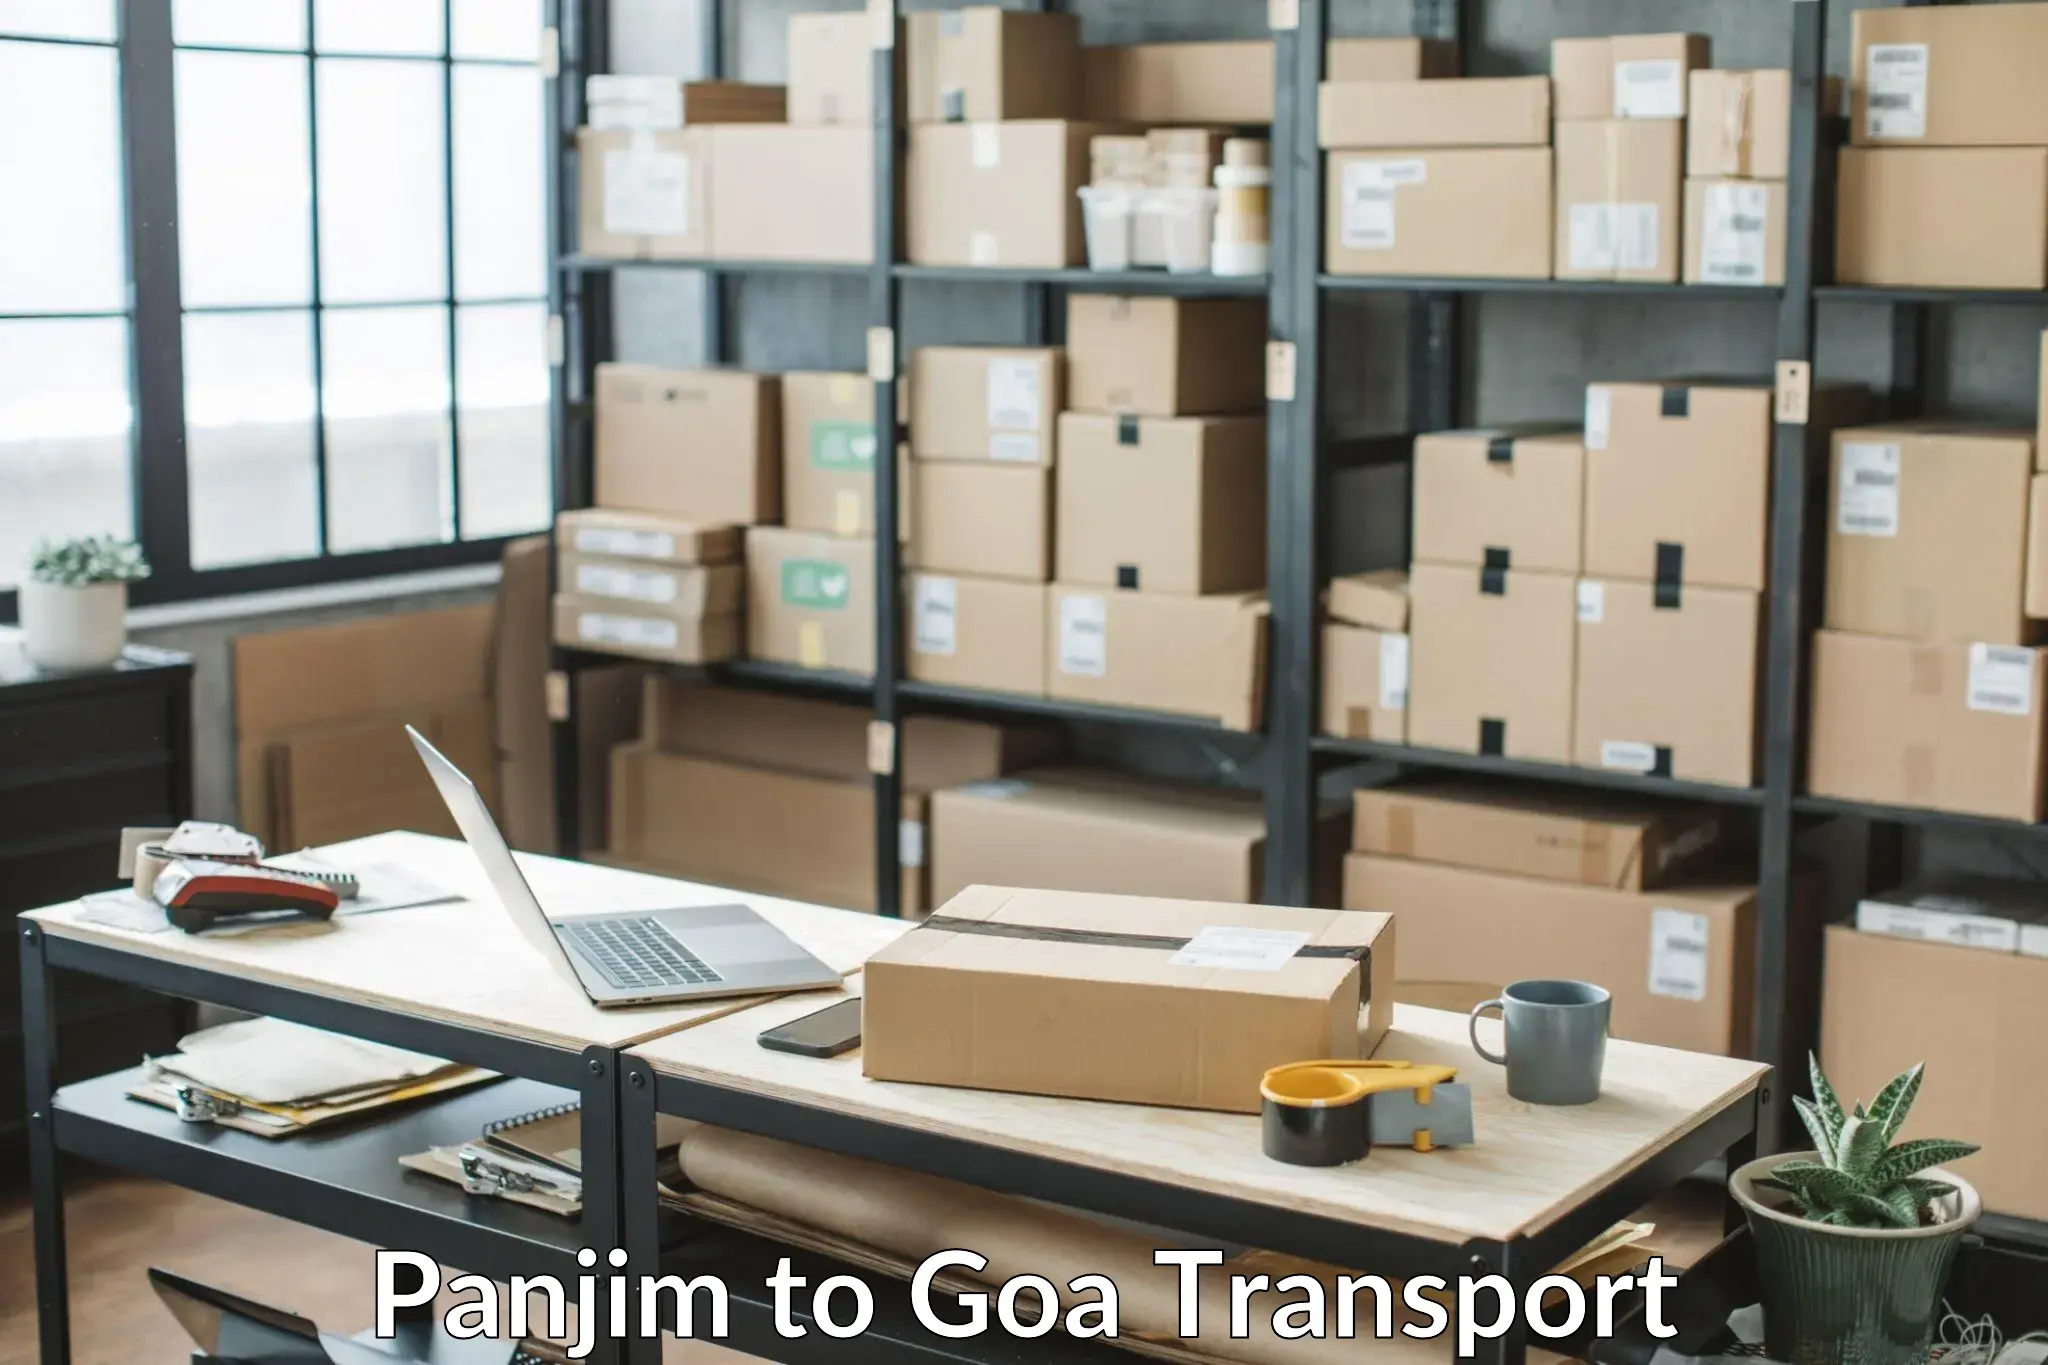 Delivery service Panjim to Goa